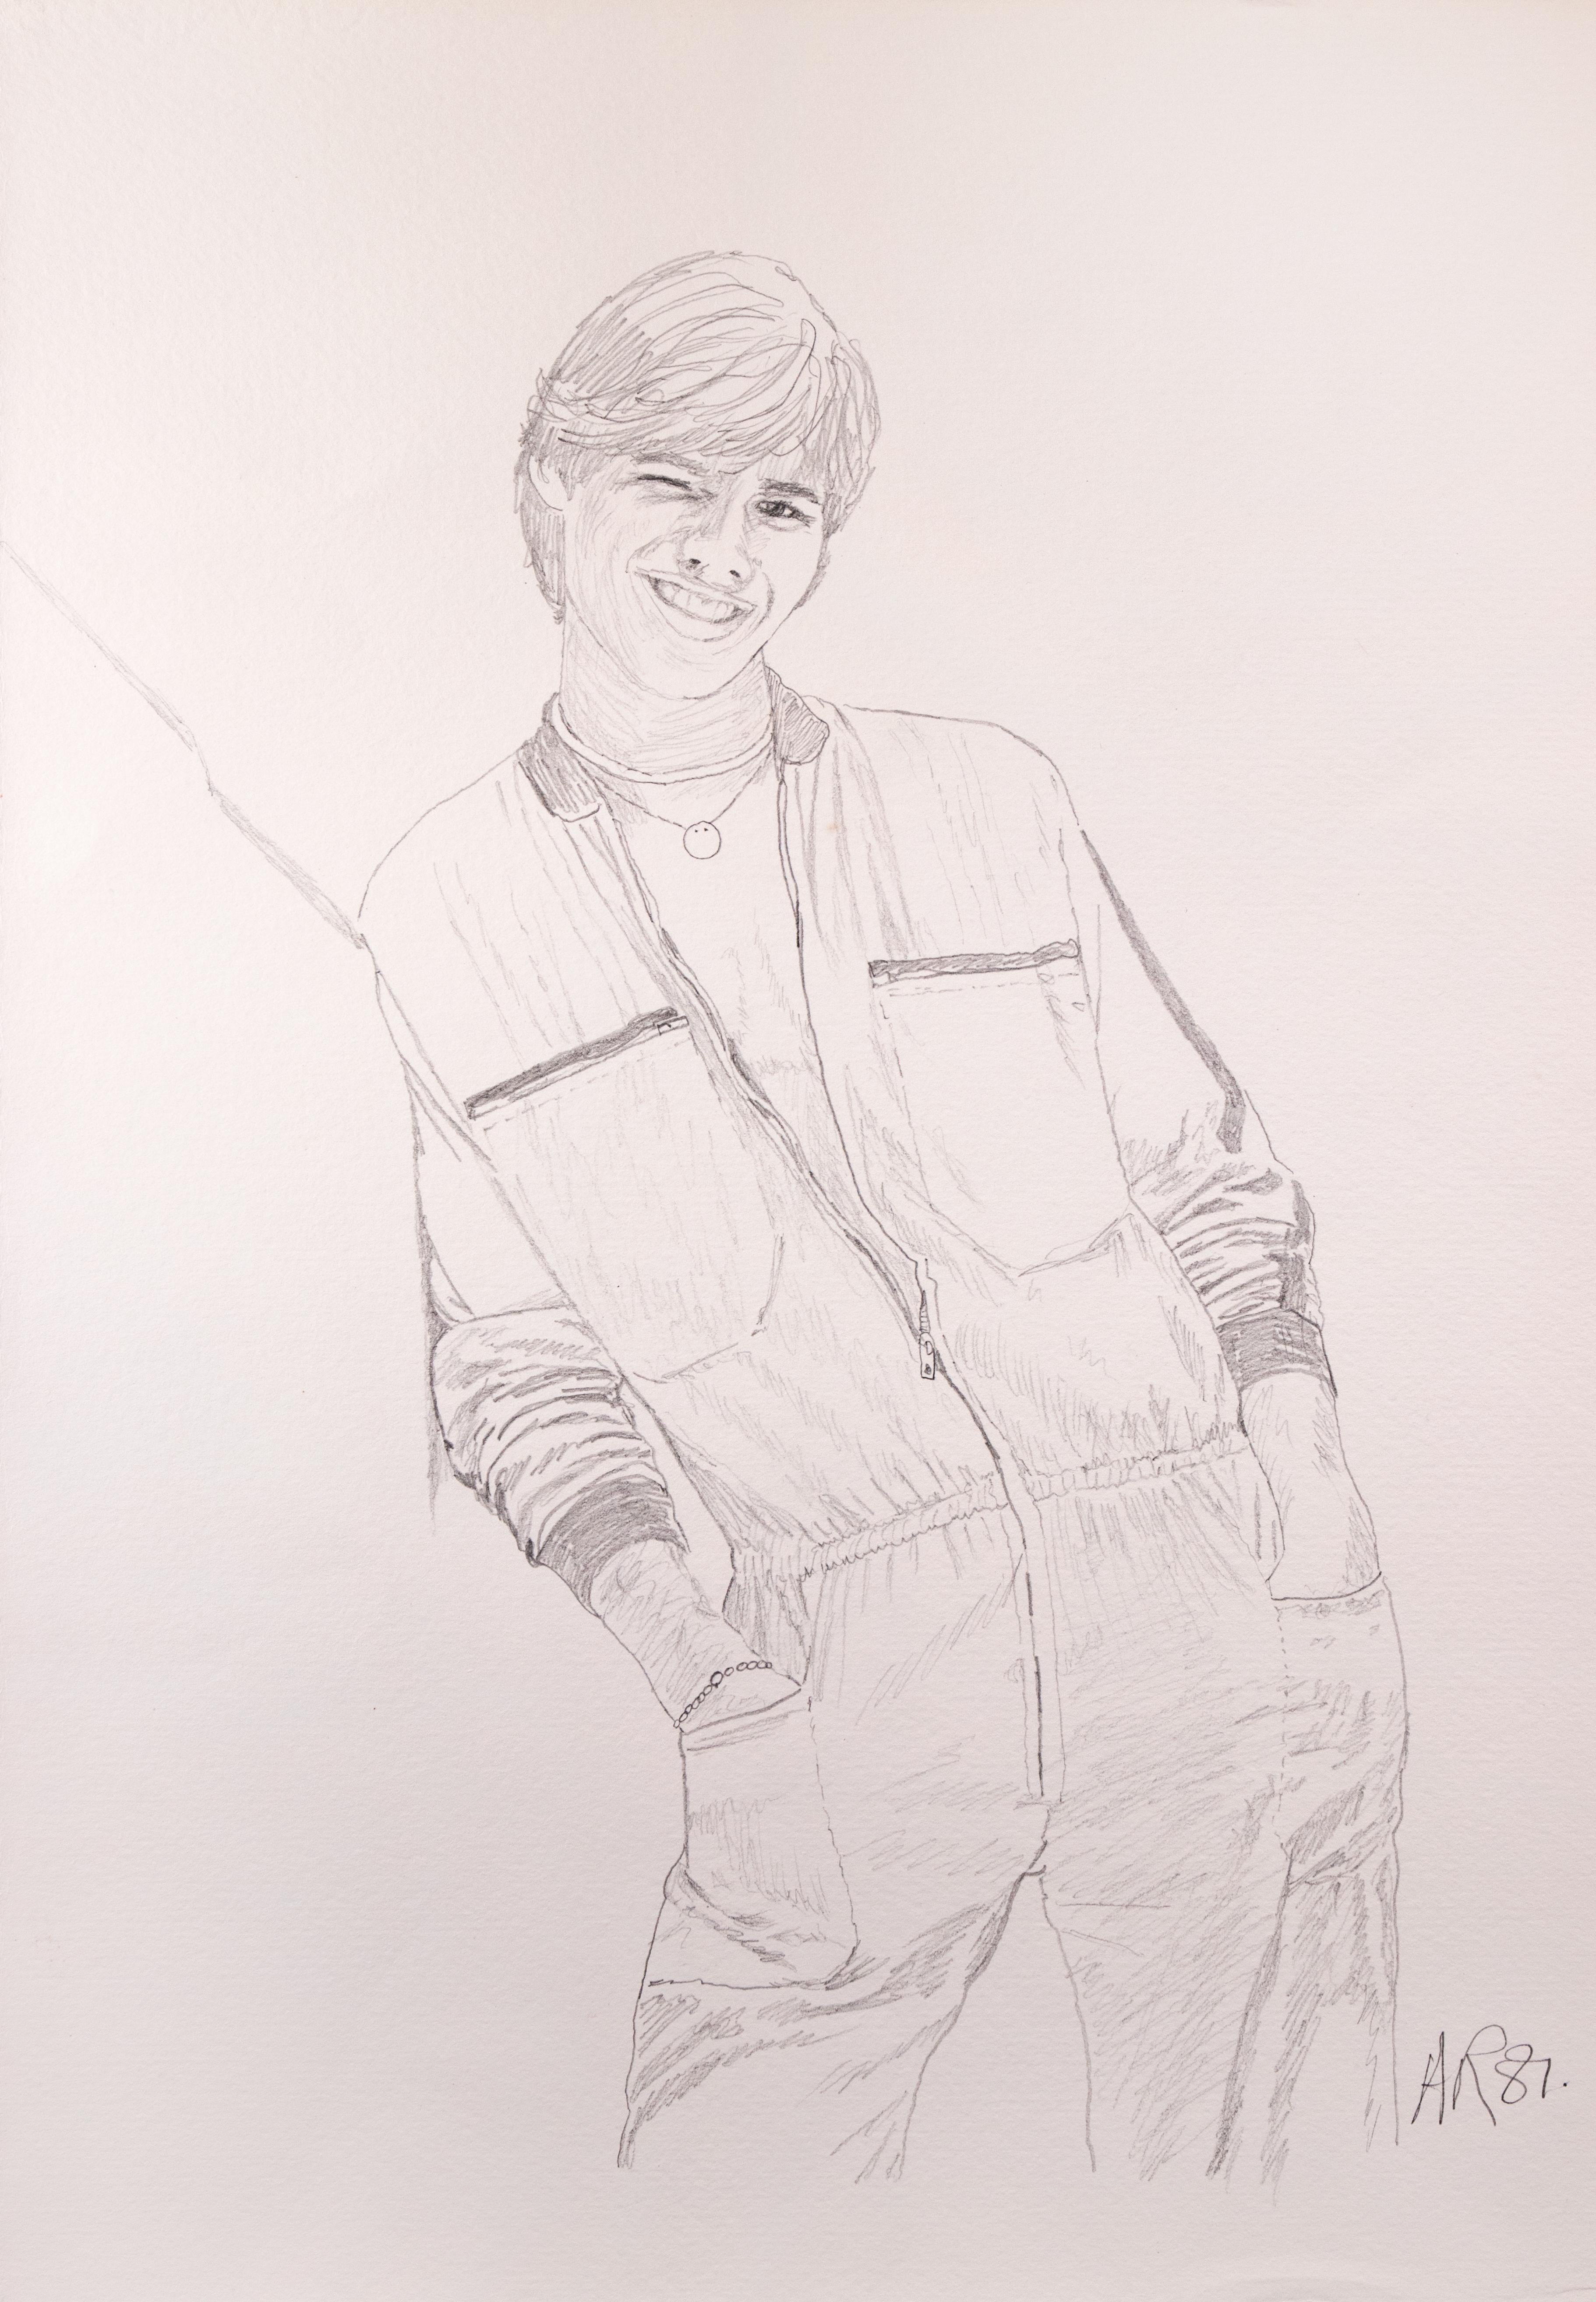 Portrait of a Boy - Original Drawing by Anthony Roaland - 1981